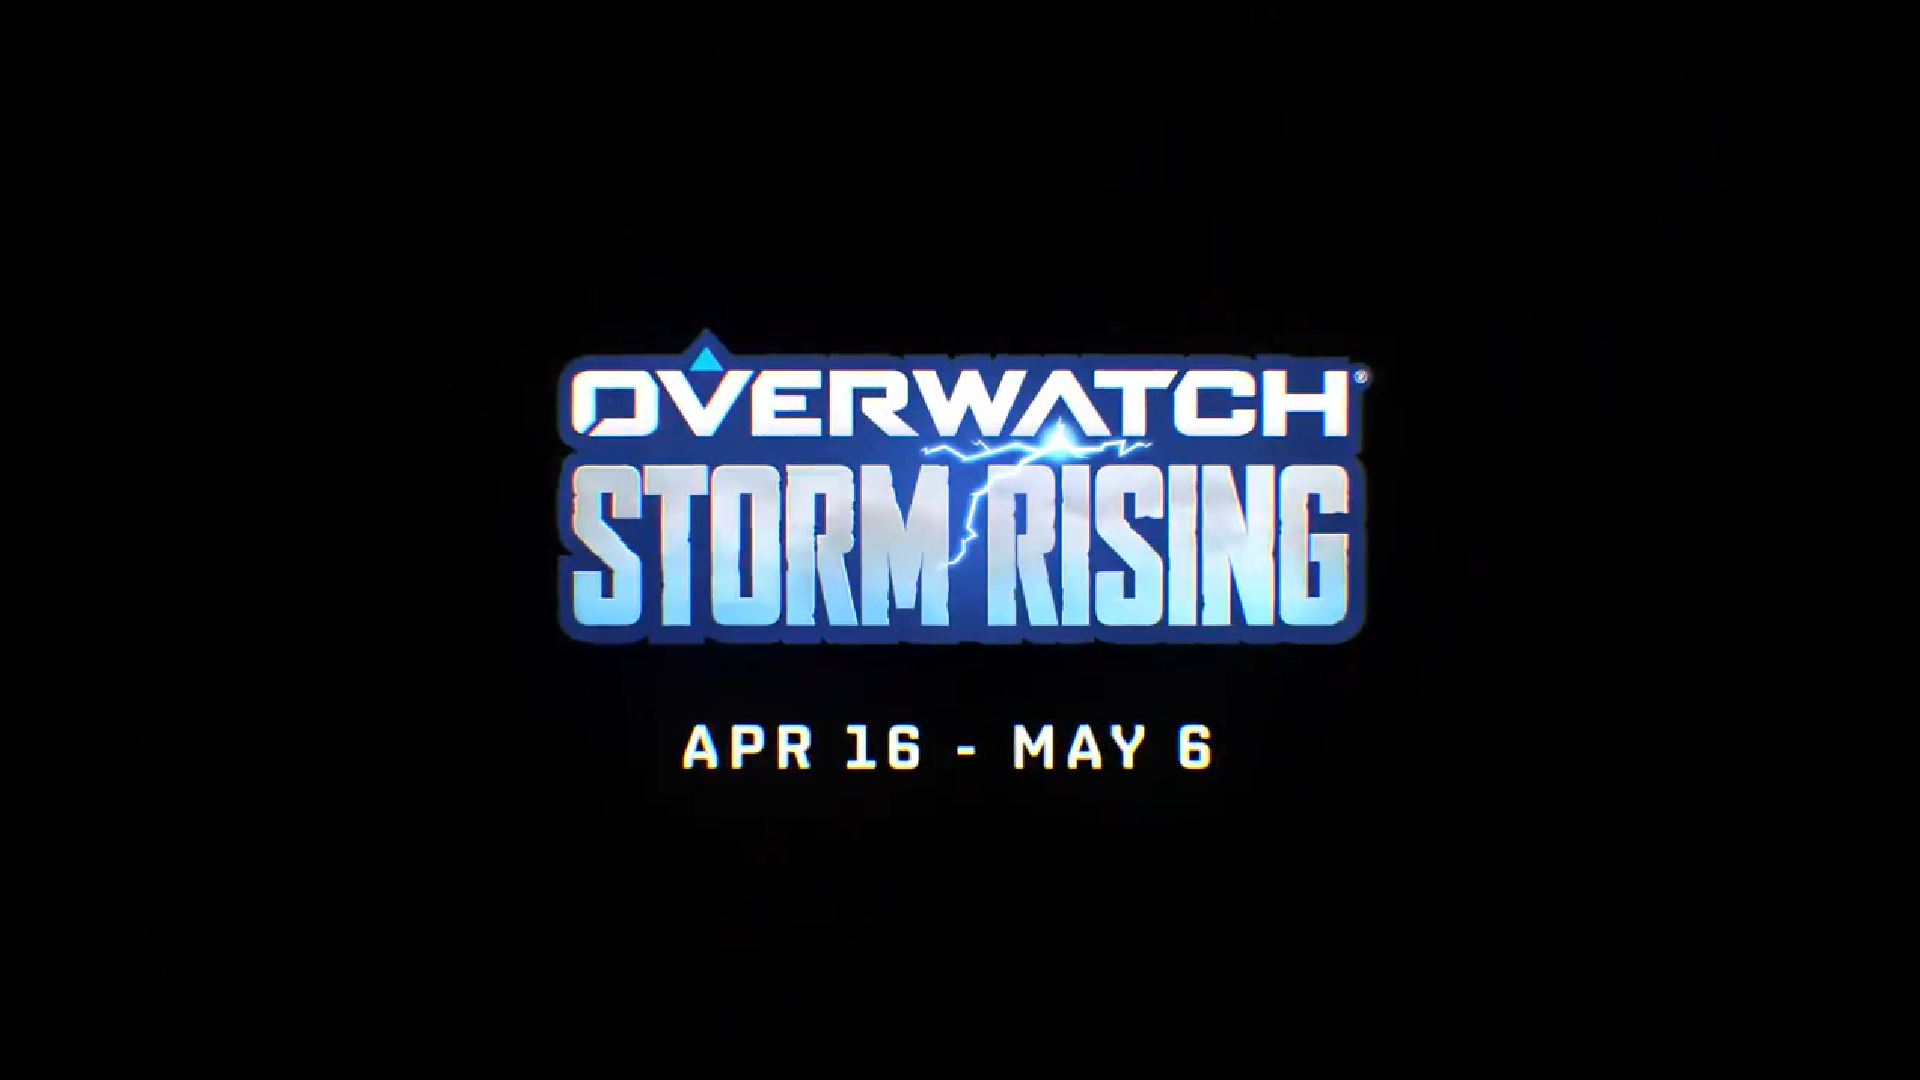 Overwatch 2019 Storm Rising Archives event dates revealed - Dot Esports